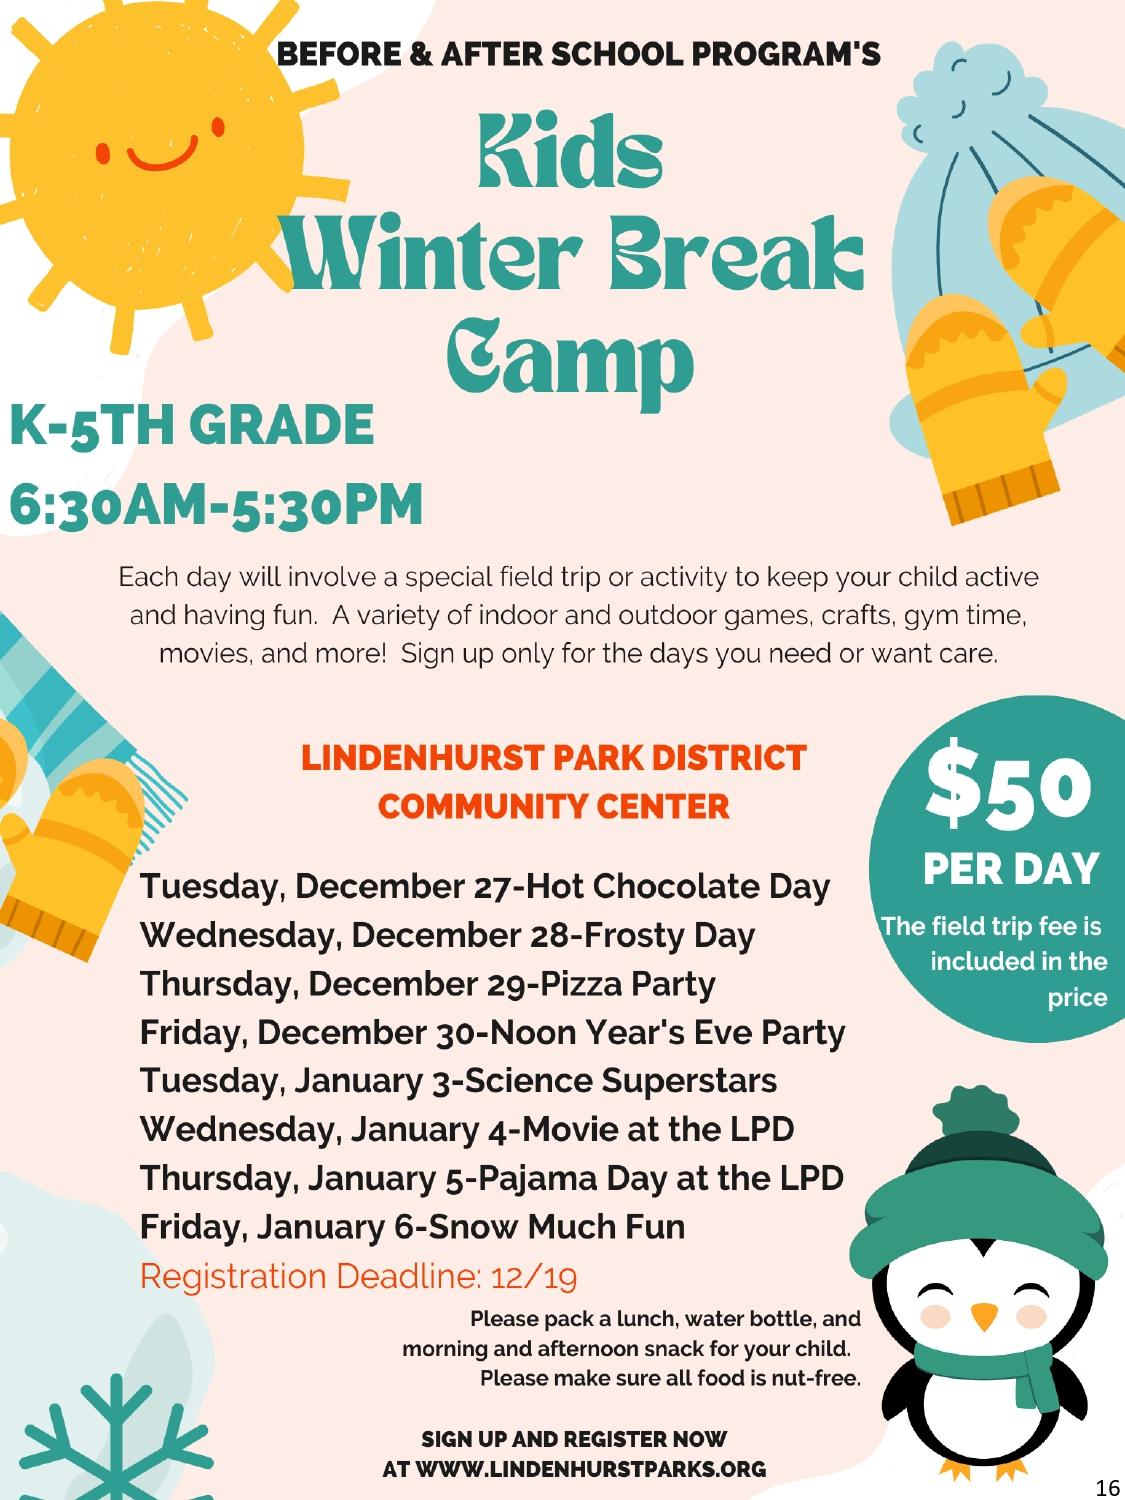 8 Fun Camps for June School Holidays - Bklyner